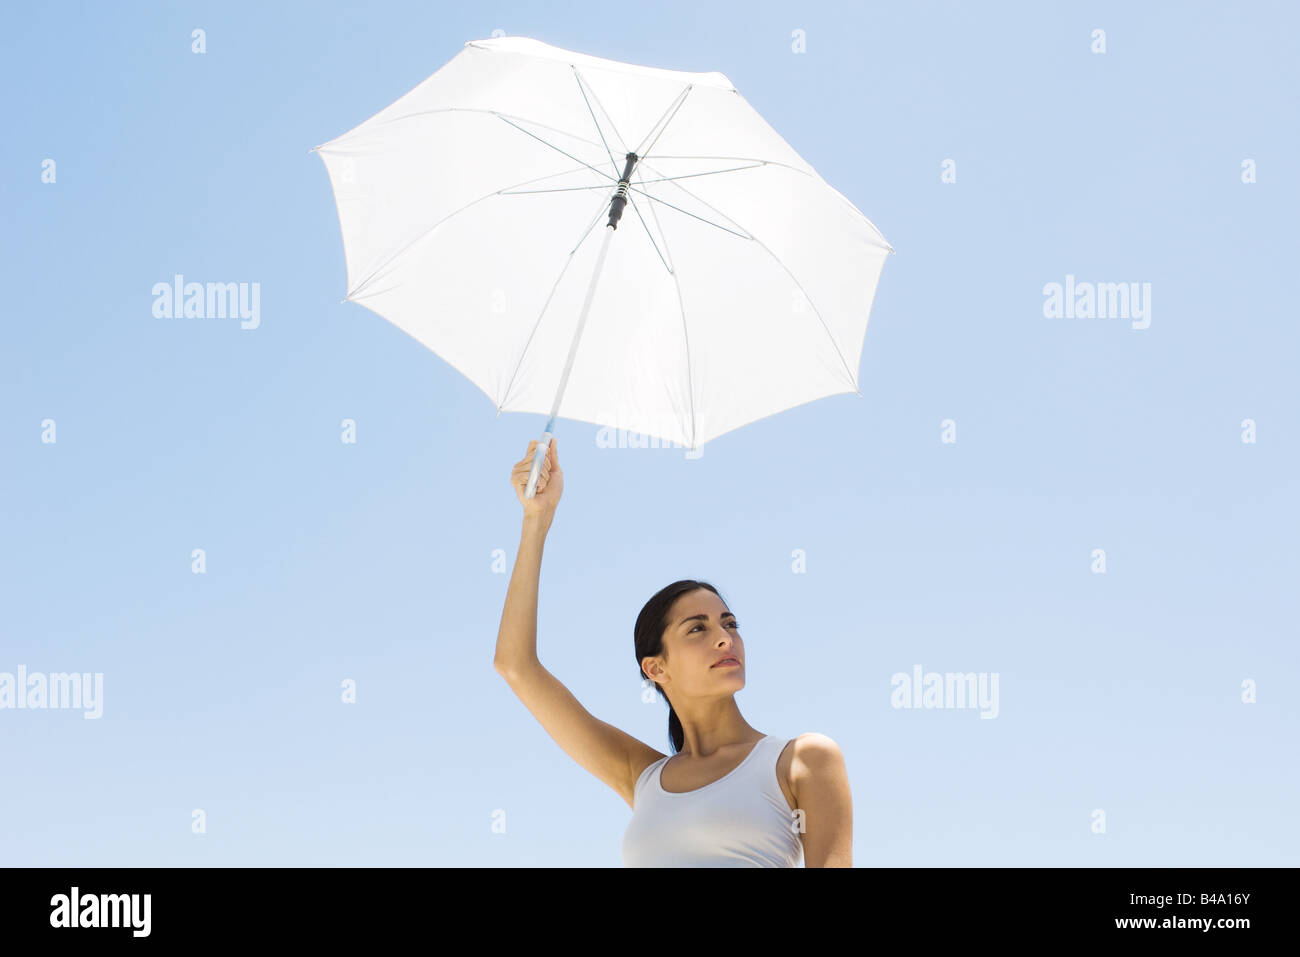 Woman holding up parasol, looking away Stock Photo